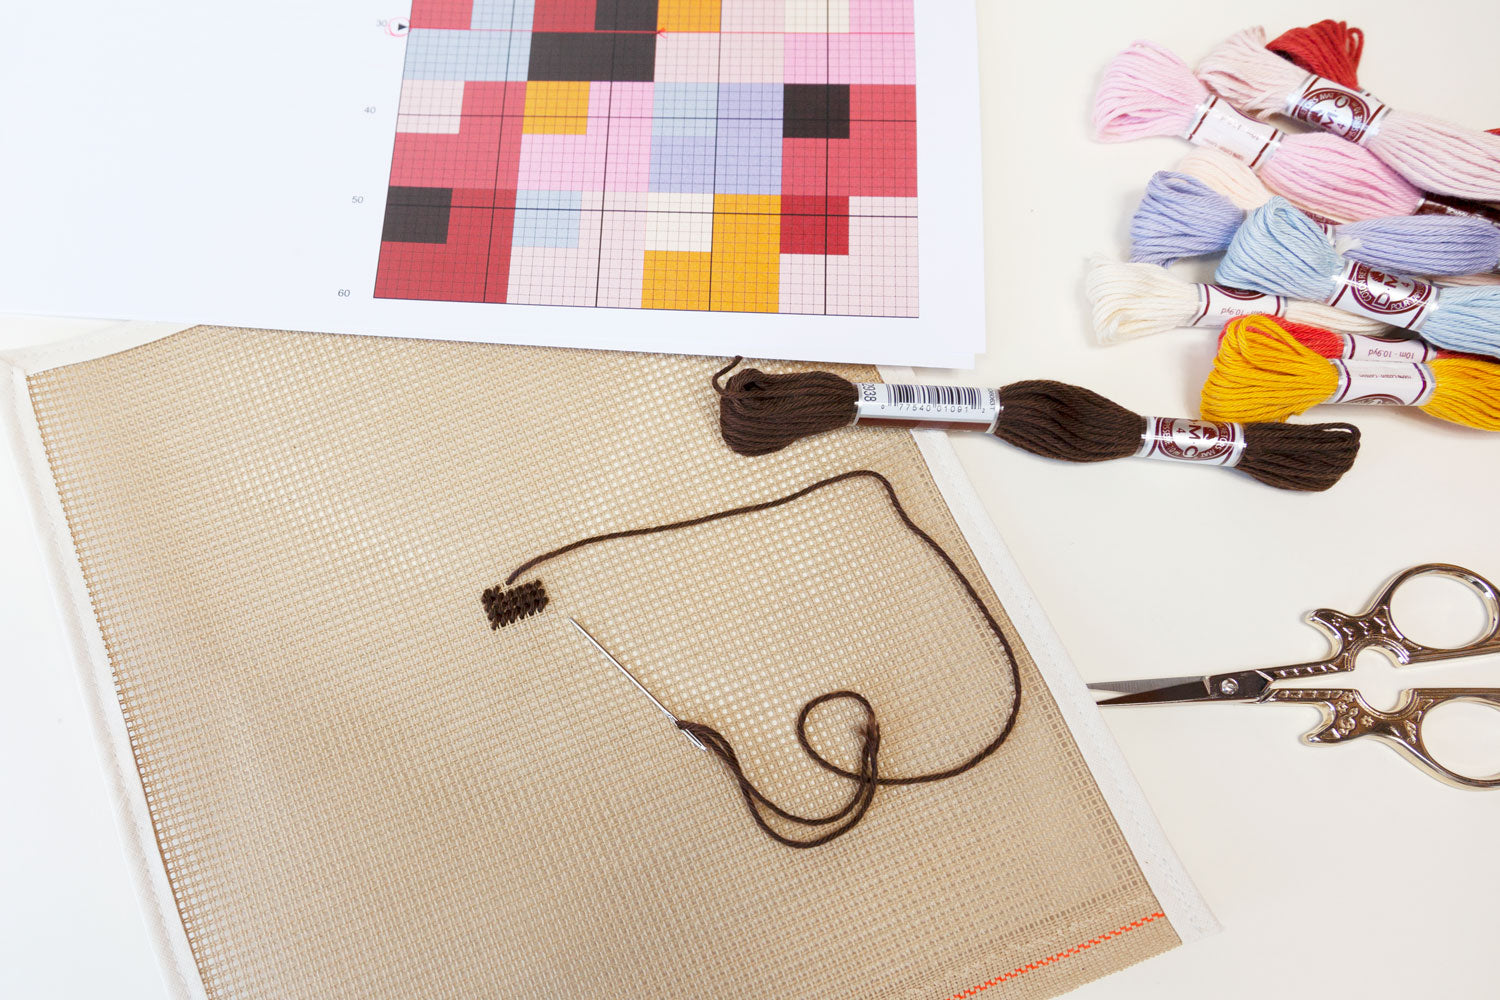 How to stitch with a needlepoint chart